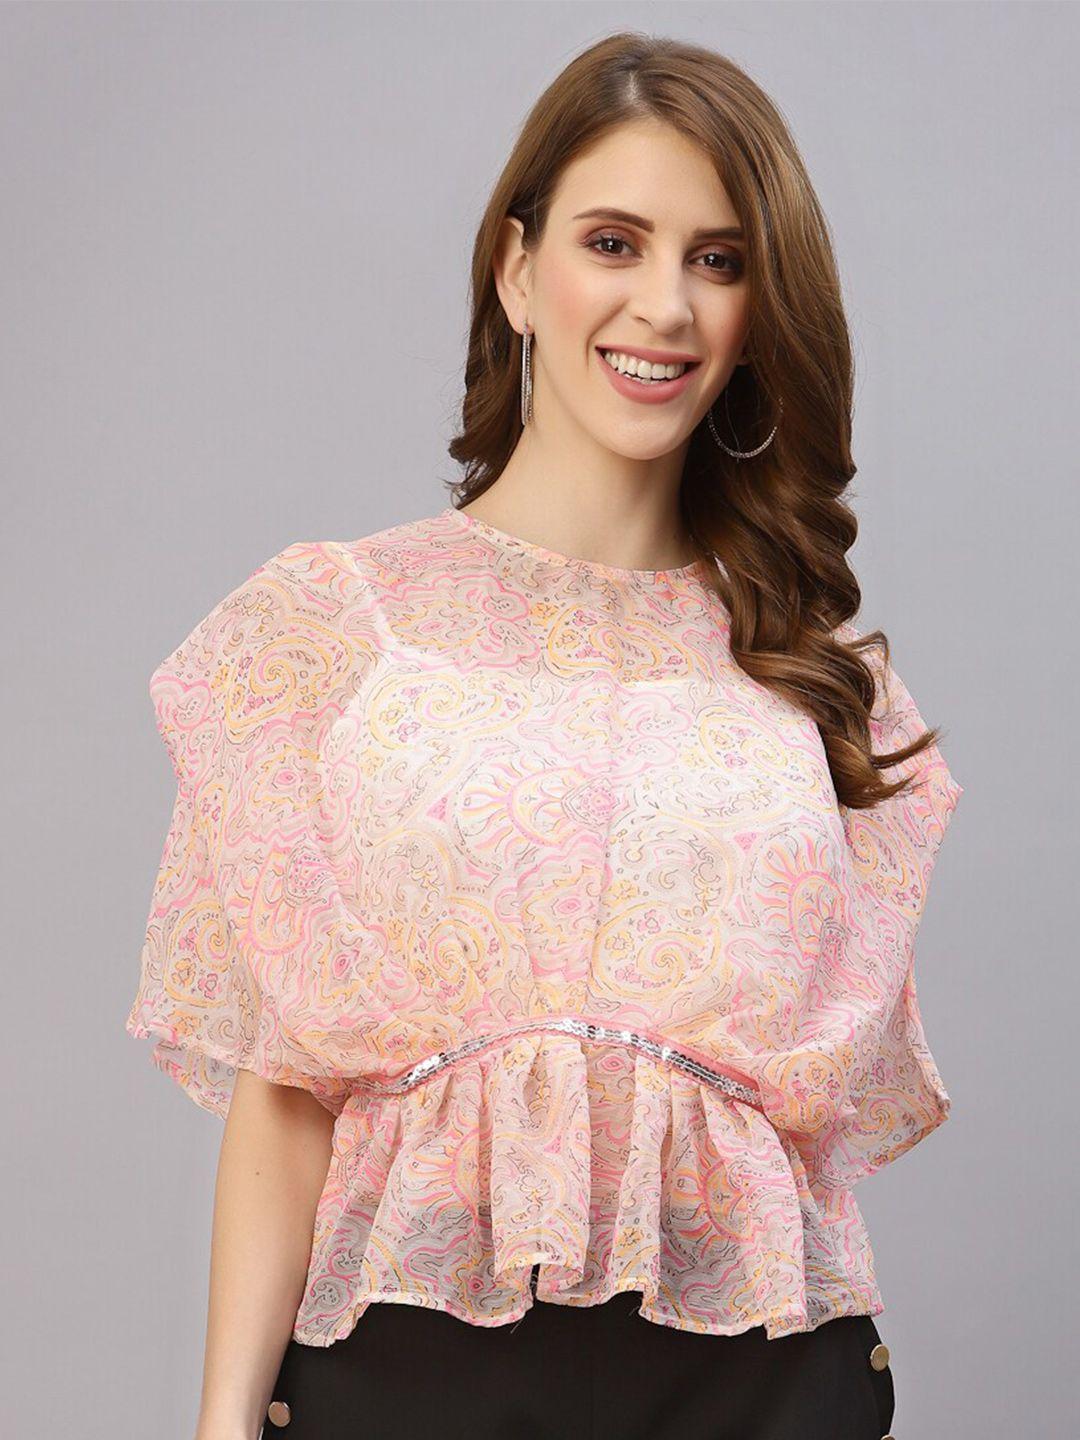 raassio multicoloured floral print chiffon styled back top